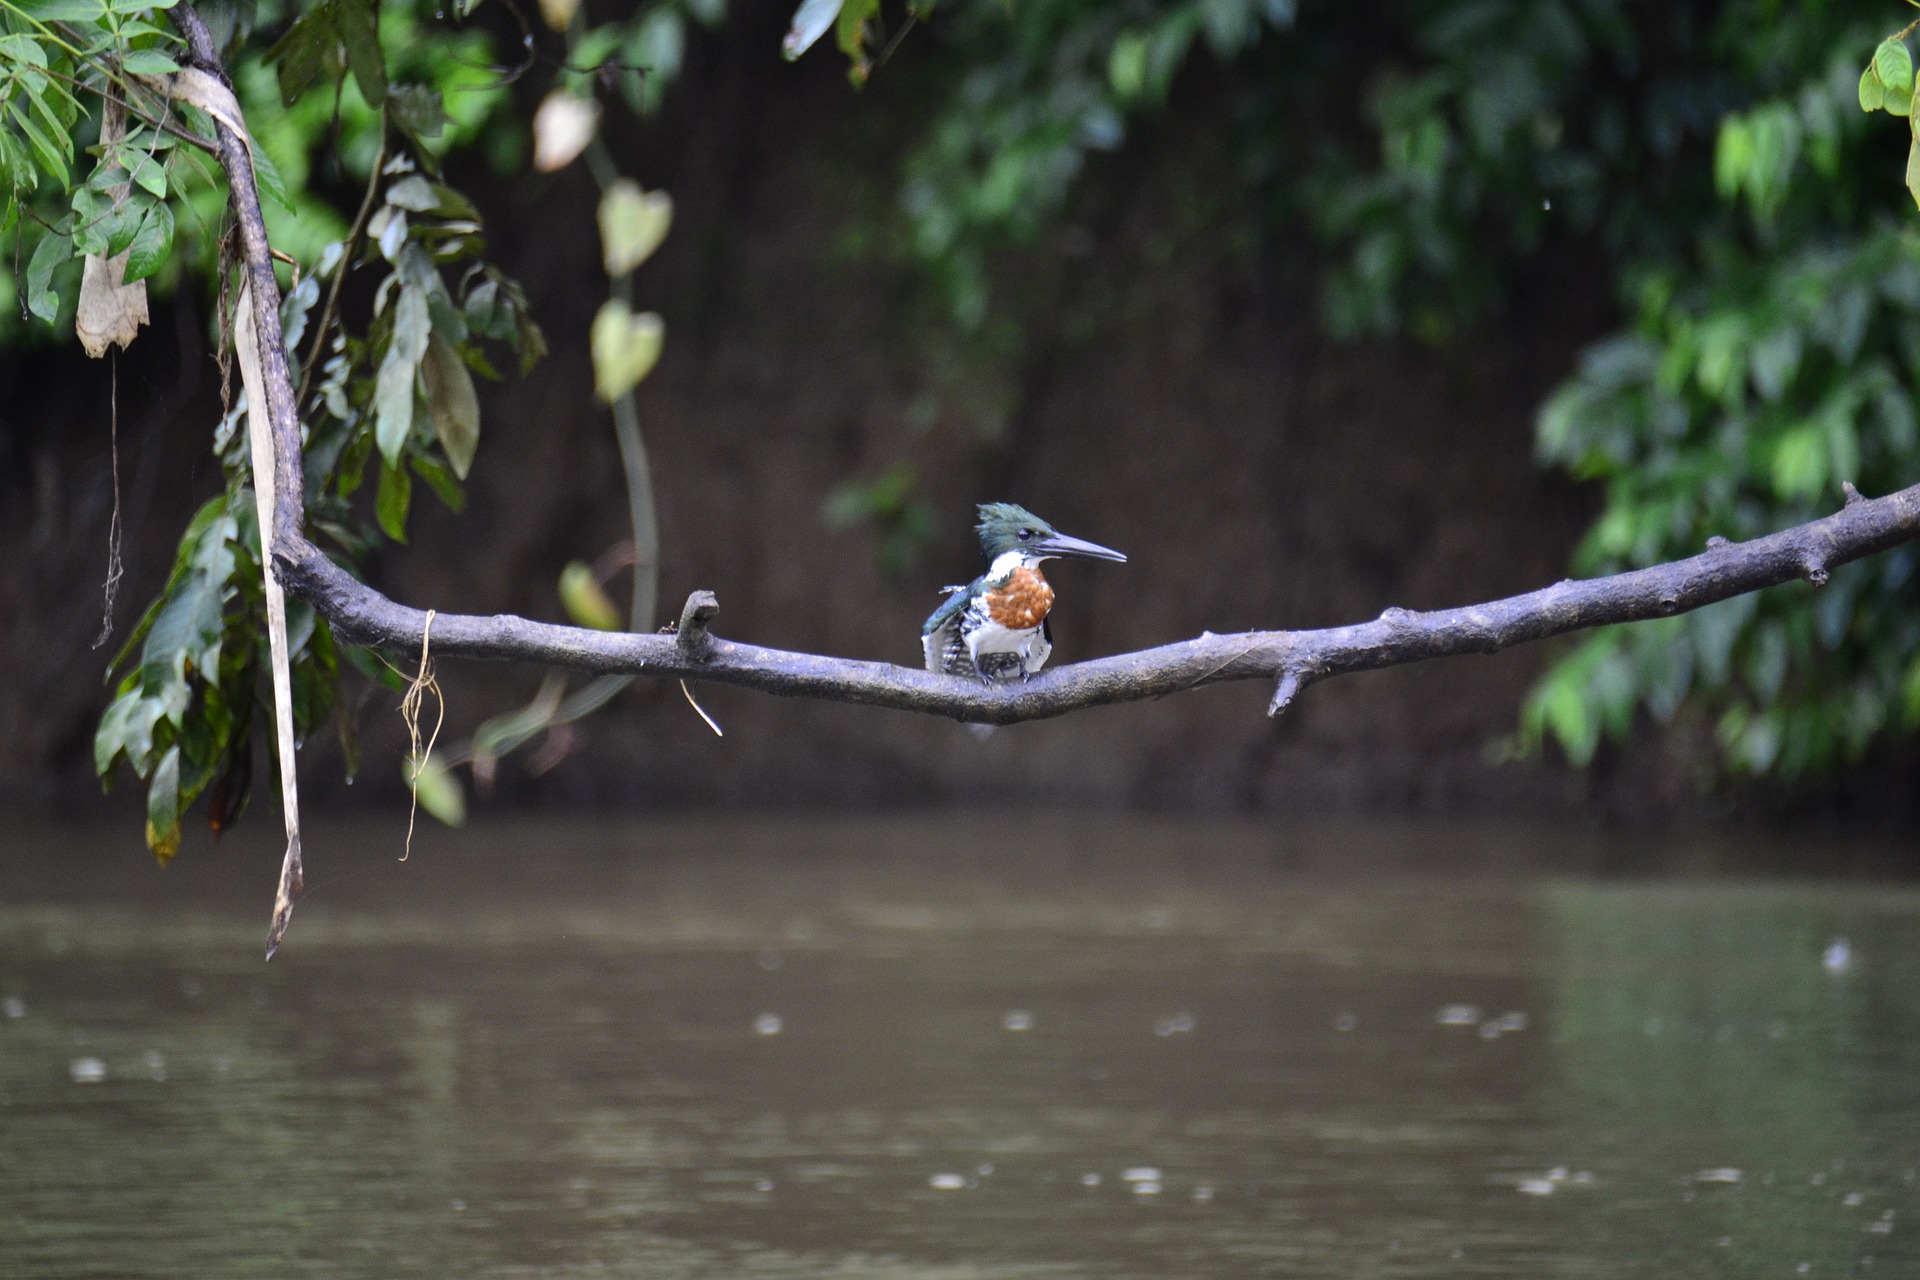 Belted kingfisher sitting on branch over river.